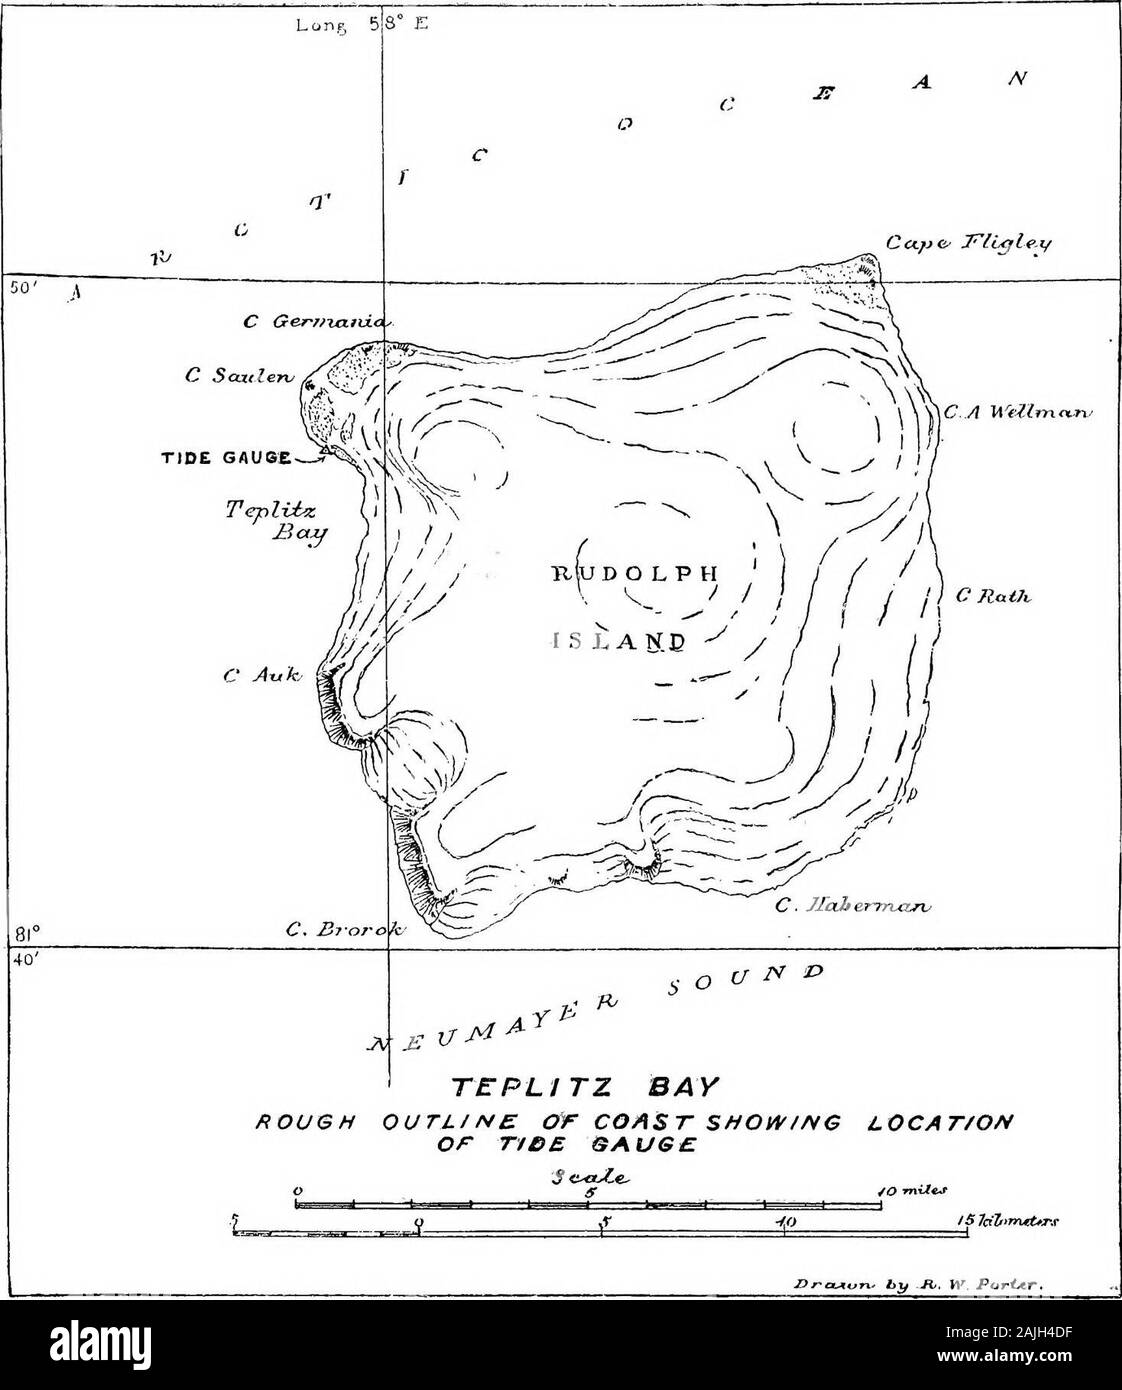 Scientific results obtained under the direction of William J Peters ... . TIDAL OBSERVATIONS 495 RBCORDS The following are the original uncorrected readings of the tide gauges at Cape Flora andTeplitz Bay. The high and low water observations are denoted by the letters H andIt, respectively, and following the reading. A swell or light swell, if noted at observation,is denoted by an asterisk (*) or dagger (f). At Cape Flora, no wind register being available,the anemometer dial readings in miles were recorded, as also the true direction ; the anemo-meter dial read from zero to 990 miles. For the Stock Photo